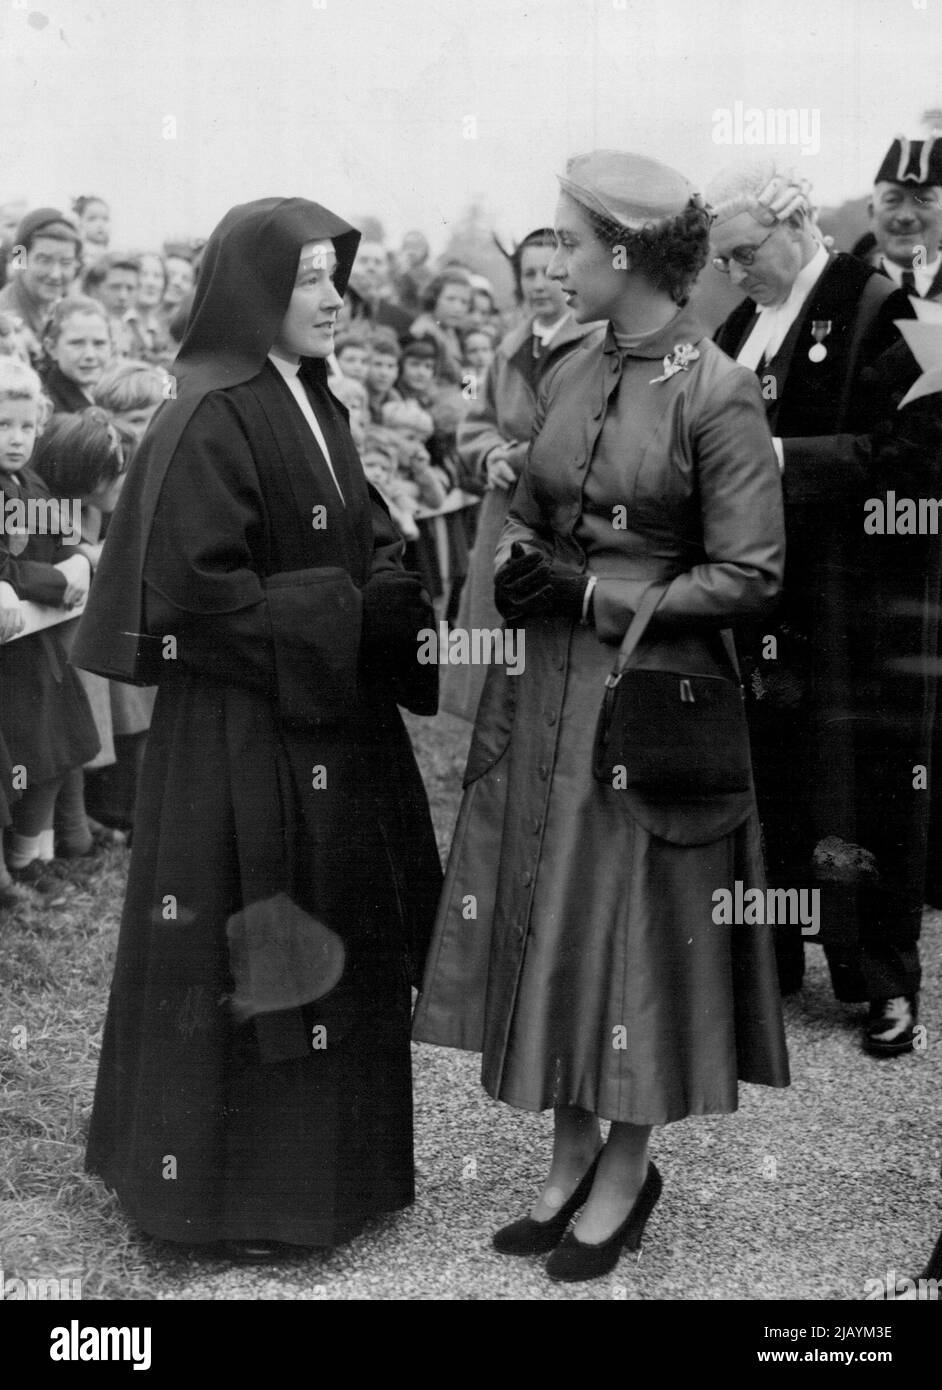 Absorbed in cover Princess Margaret and a Sister of Mercy in the midst of schoolchildren at Henle Thames, where to-day the Princes Planted the first tree of the new Avenue in the Fail Mile. Absorbed In Conversation, Princess Margaret and a Sister of Mercy talk in the midst of school children at Henley, Thames, where Princess Margaret planted the first tree in Fair Mile recently. October 16, 1953. (Photo by Daily Mail Contract Picture). Stock Photo